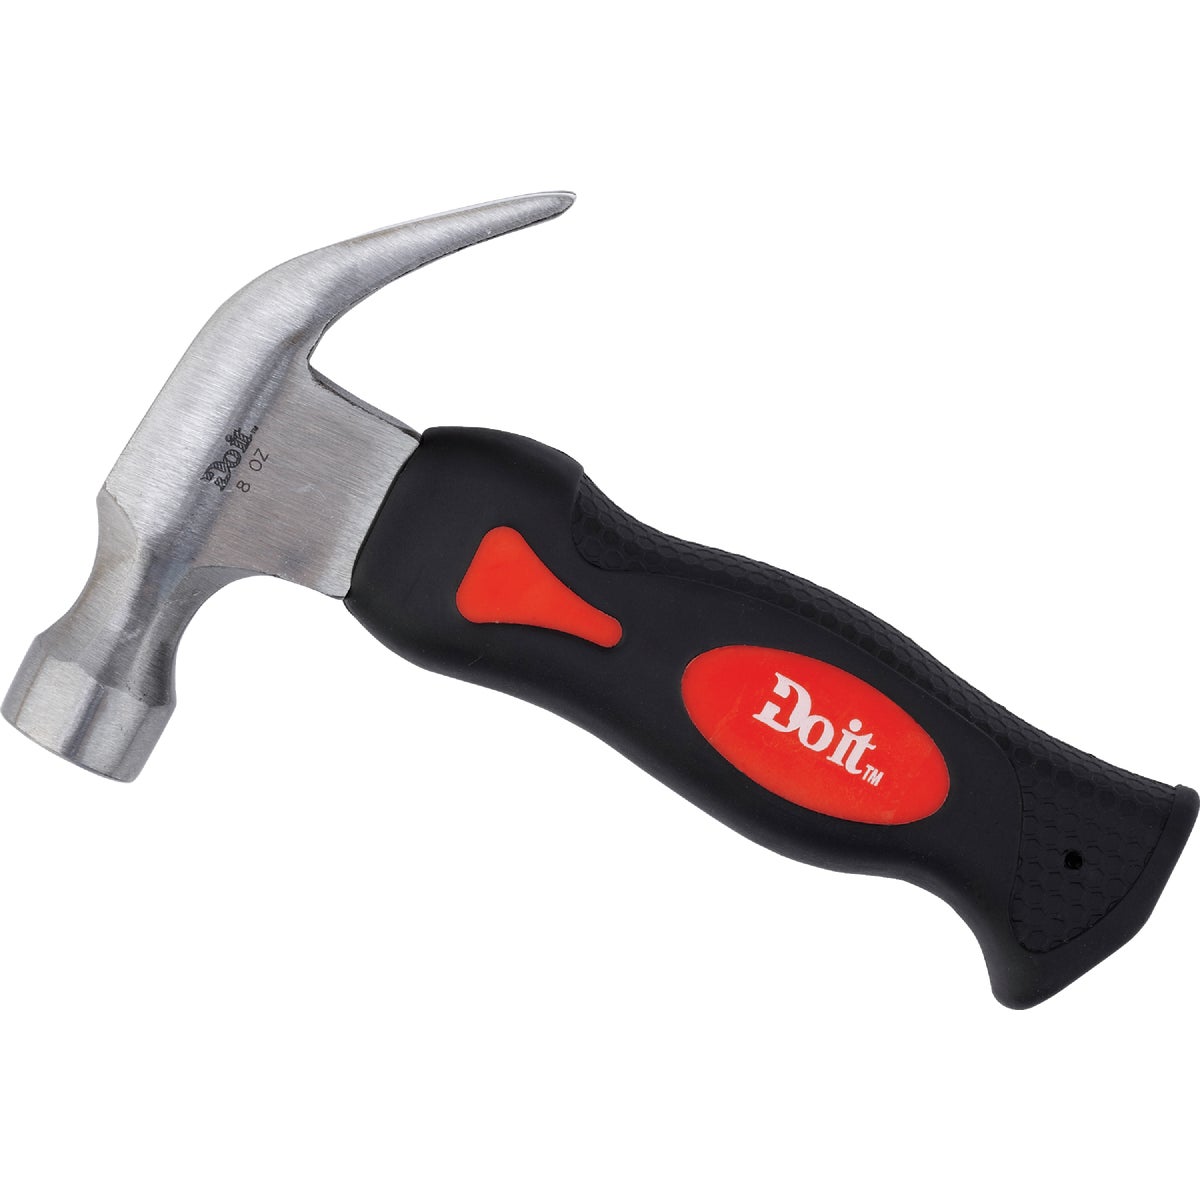 Do it Mini 8 Oz. Smooth-Face Curved Claw Hammer with Steel Handle